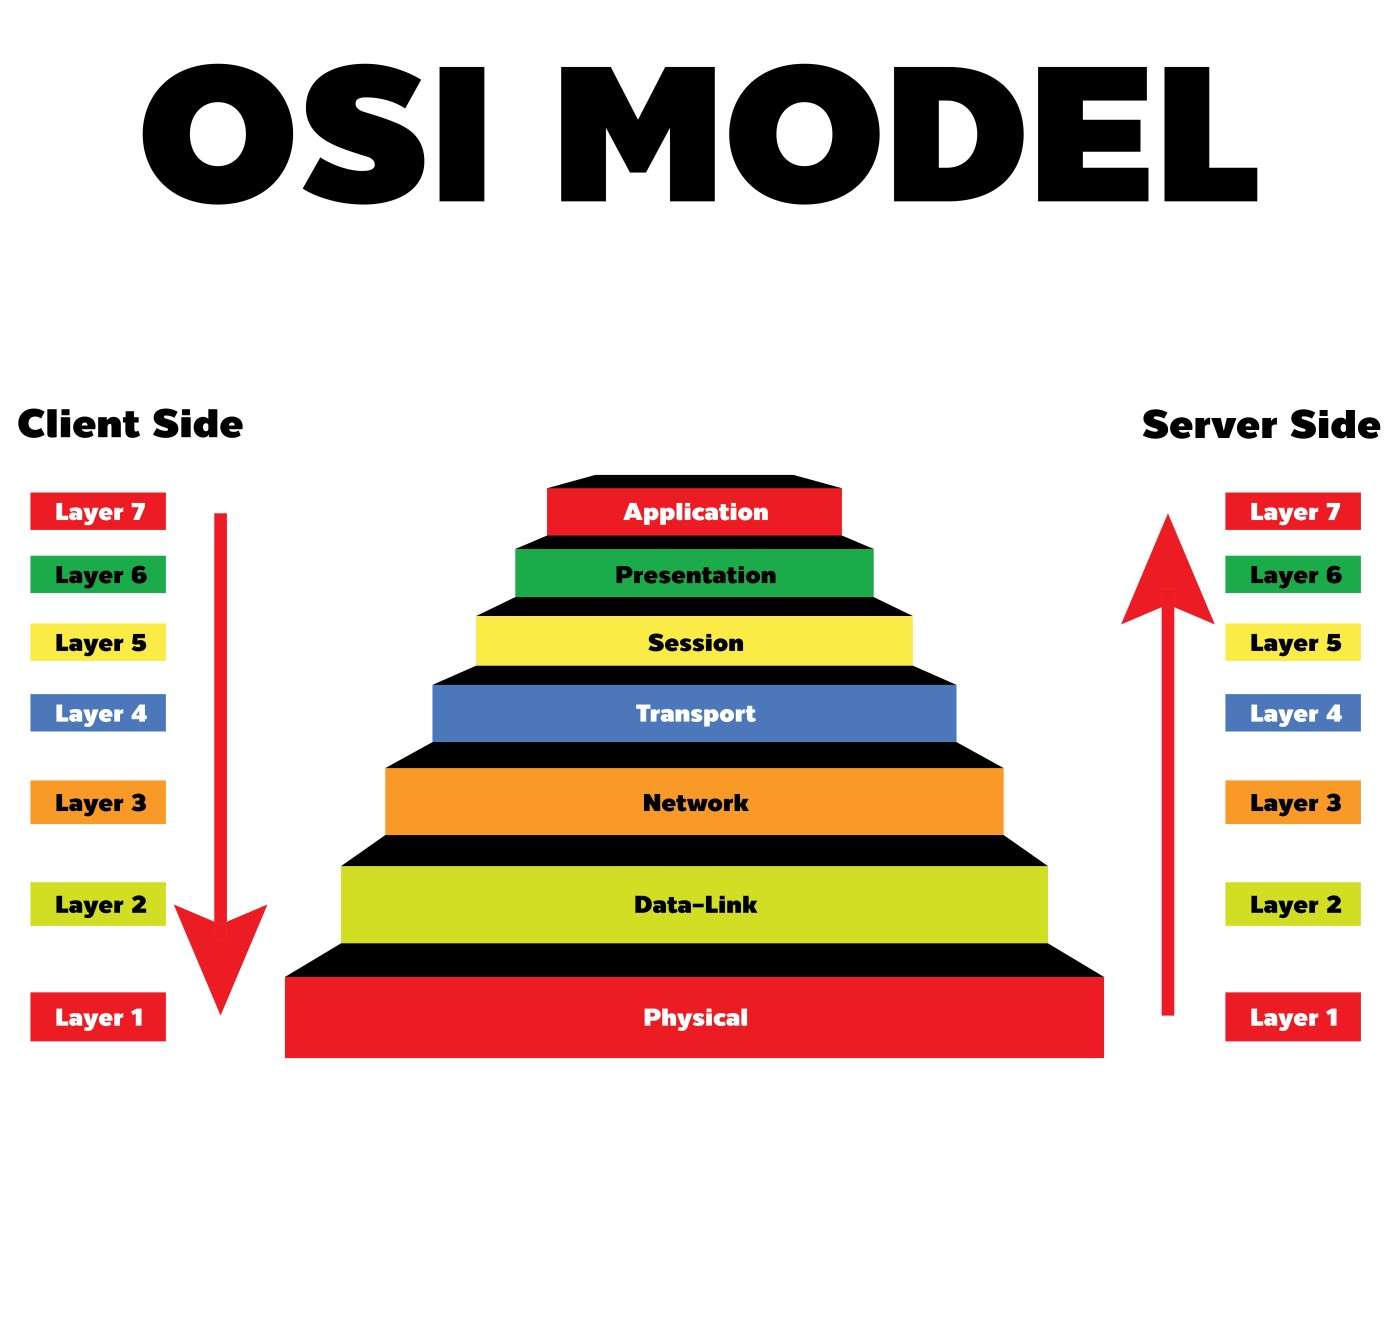 Retrieved from https://stl.tech/blog/difference-between-tcp-ip-and-osi-model/